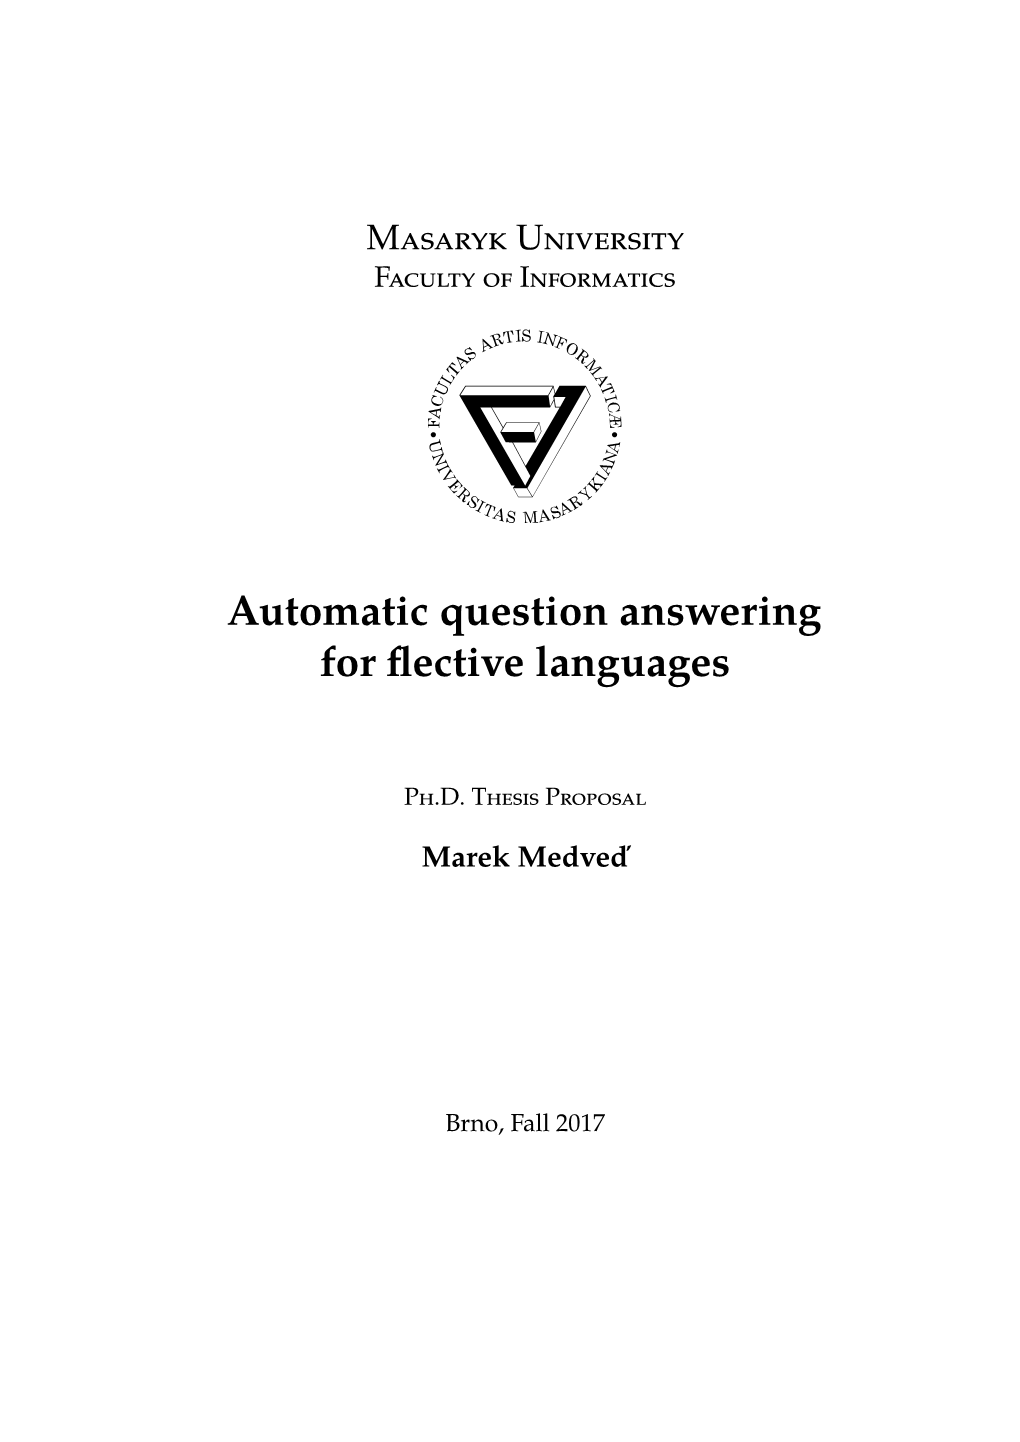 Automatic Question Answering for Flective Languages